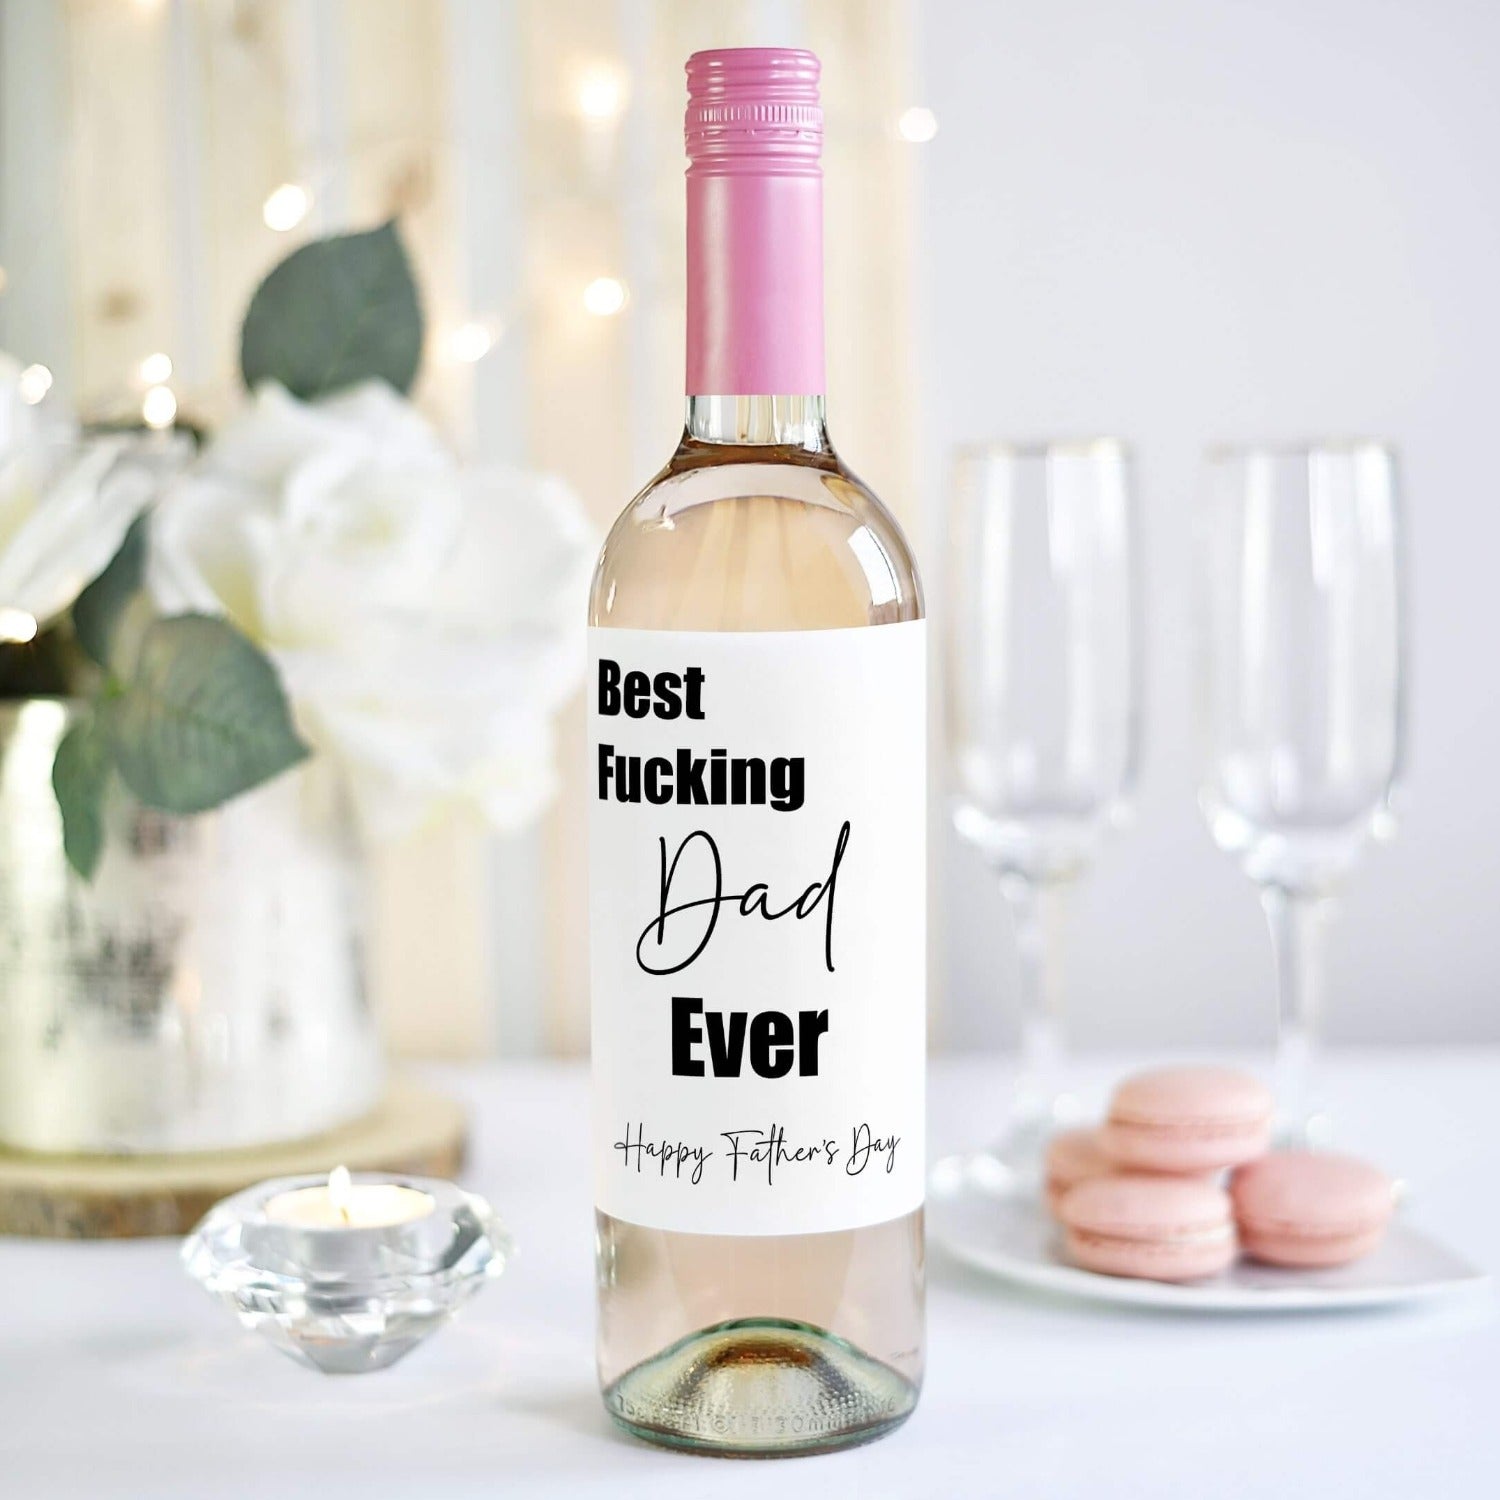 father's day gift wine bottle label - best fucking dad ever